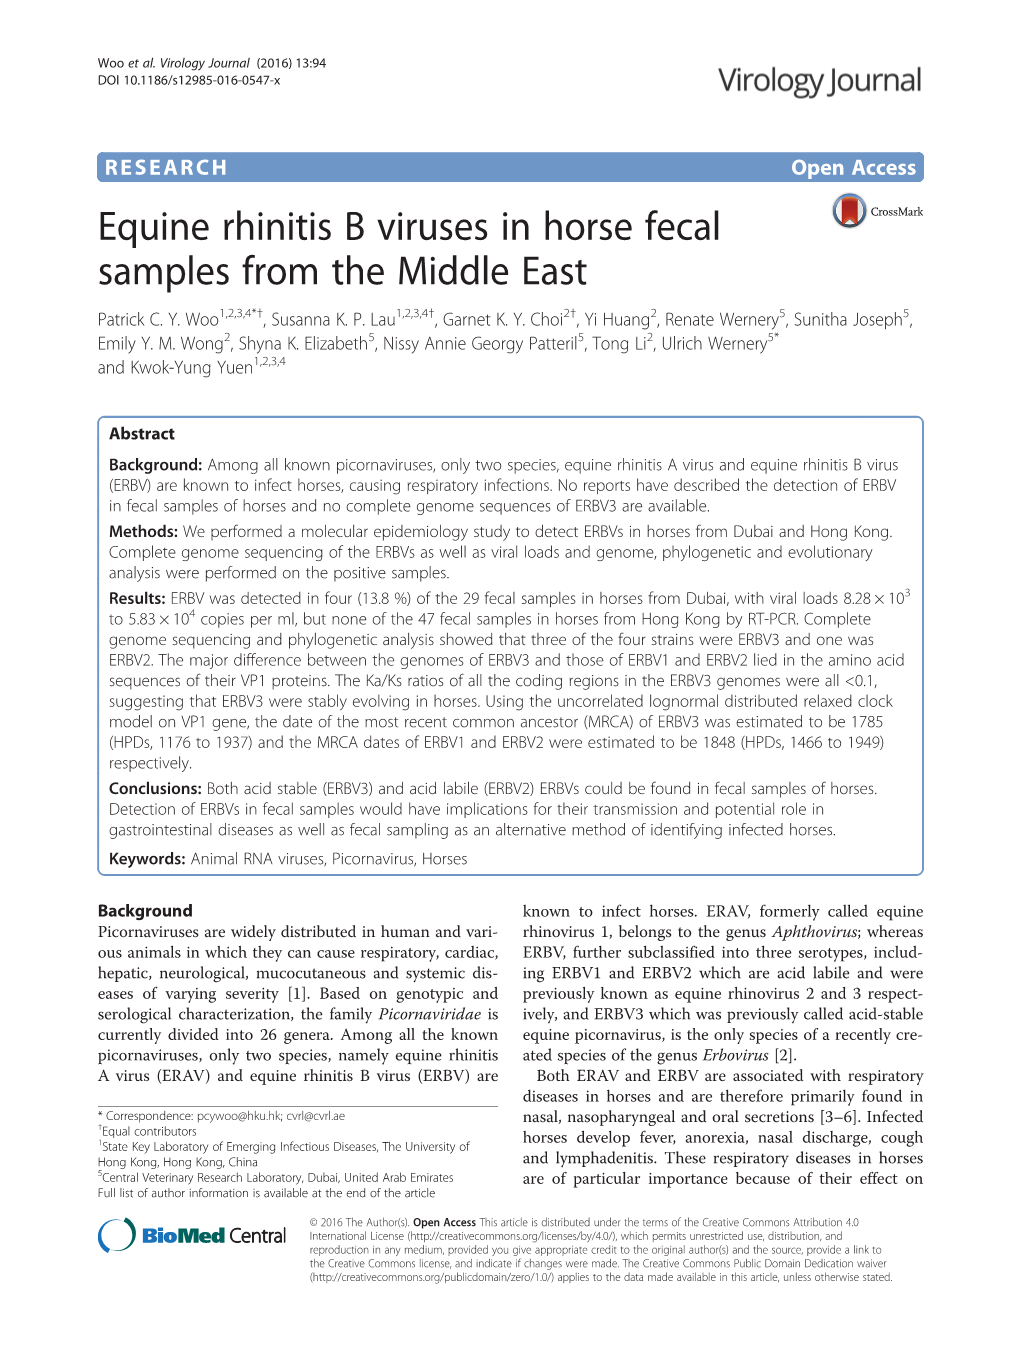 Equine Rhinitis B Viruses in Horse Fecal Samples from the Middle East Patrick C